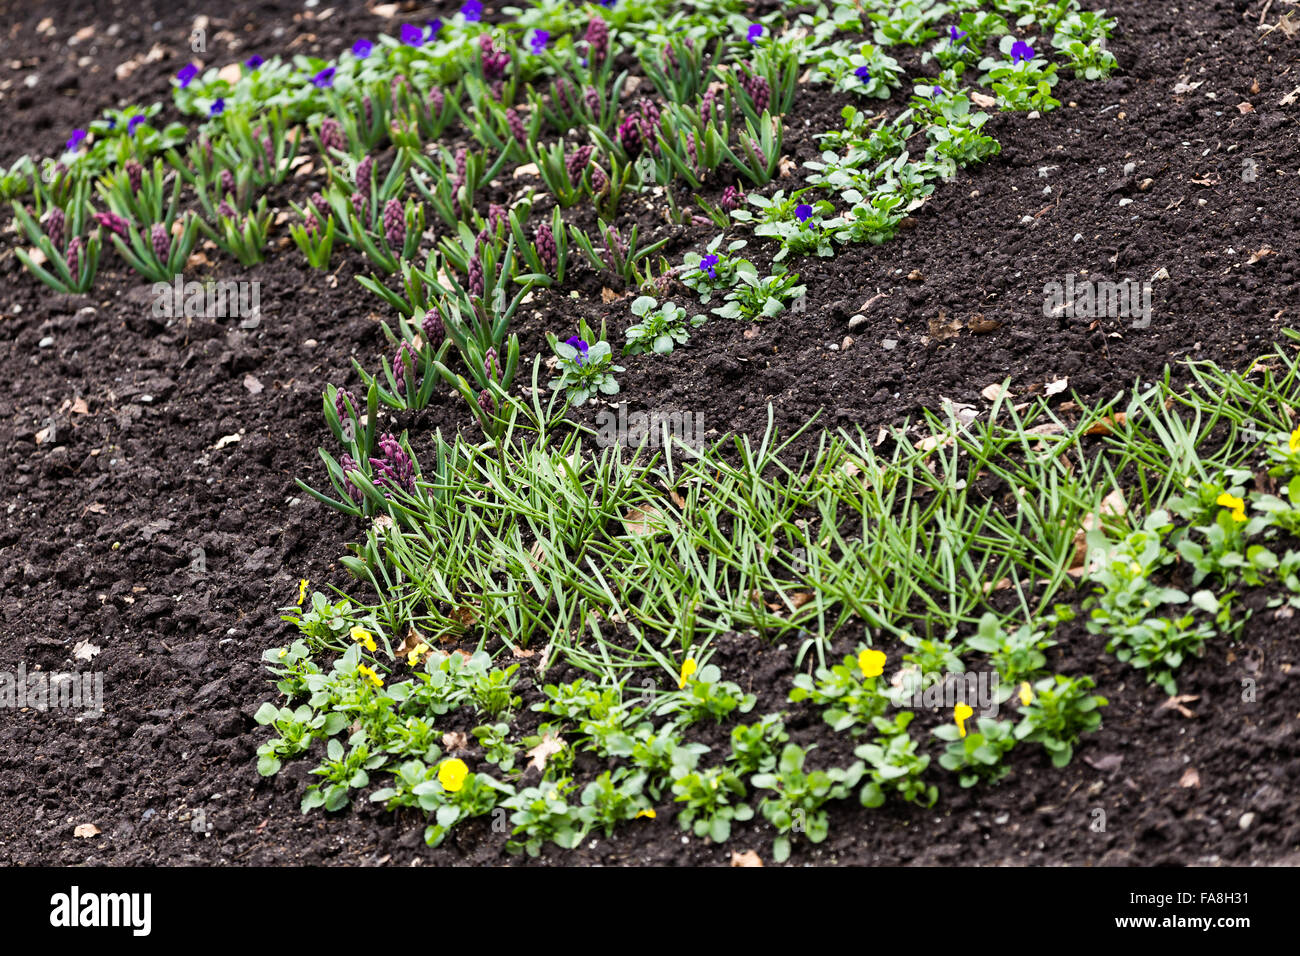 garden flower bed with curve shape Stock Photo